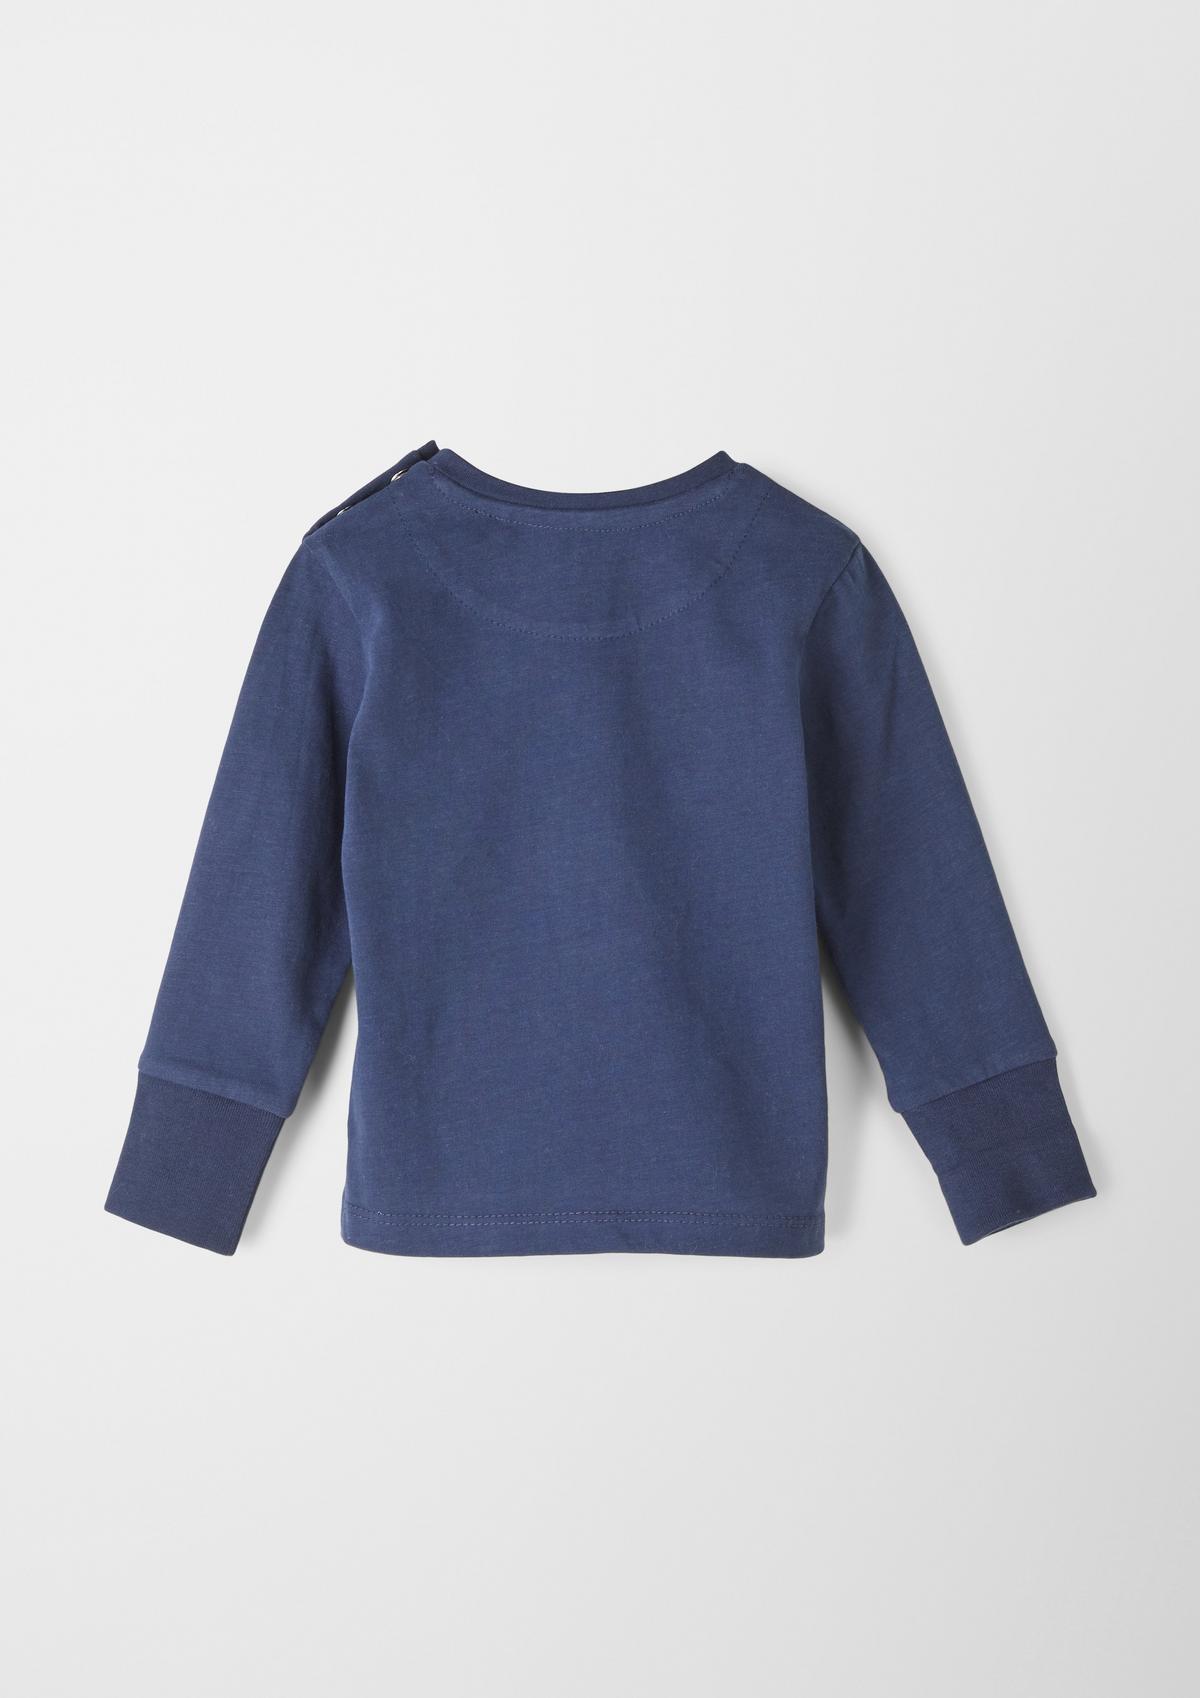 s.Oliver Long sleeve top with appliquéd sleeves